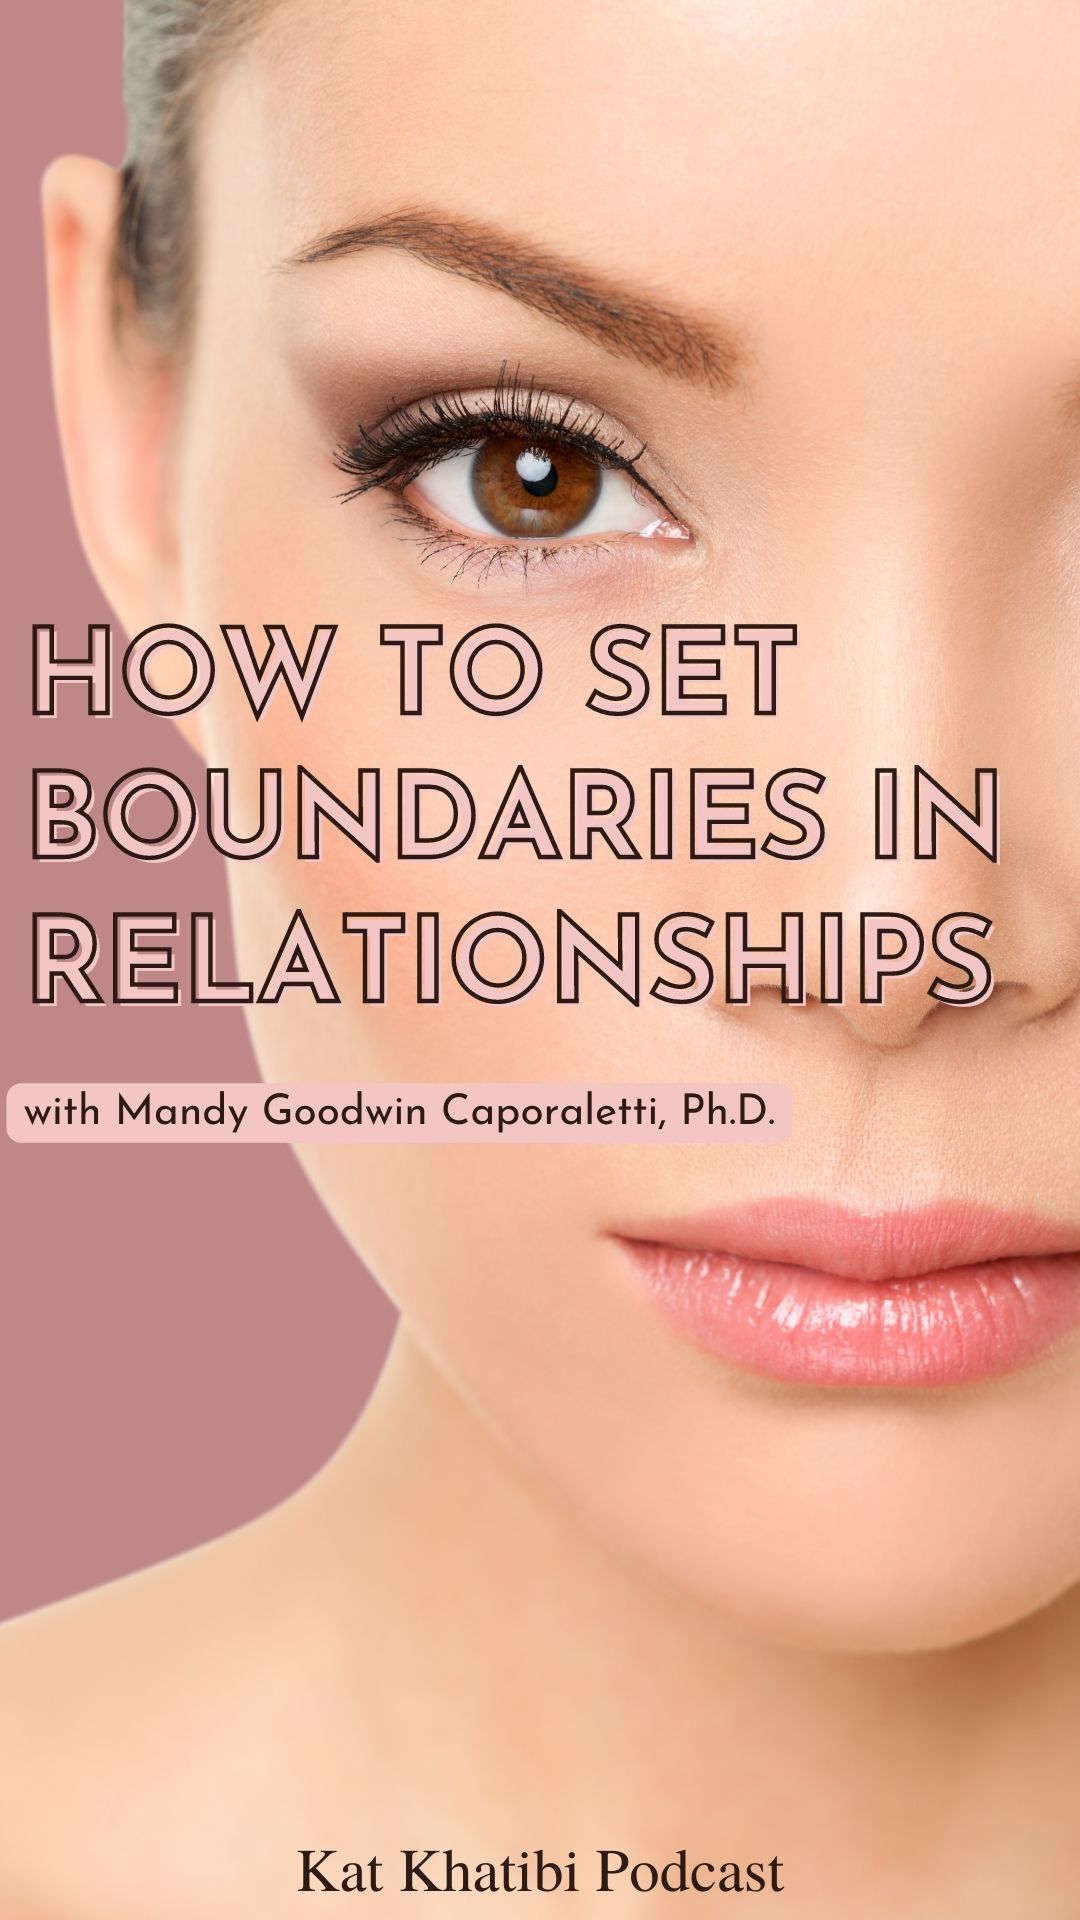 How to Set Boundaries and Manage Perceptions in Relationships with Mandy Goodwin Caporaletti, Ph.D.